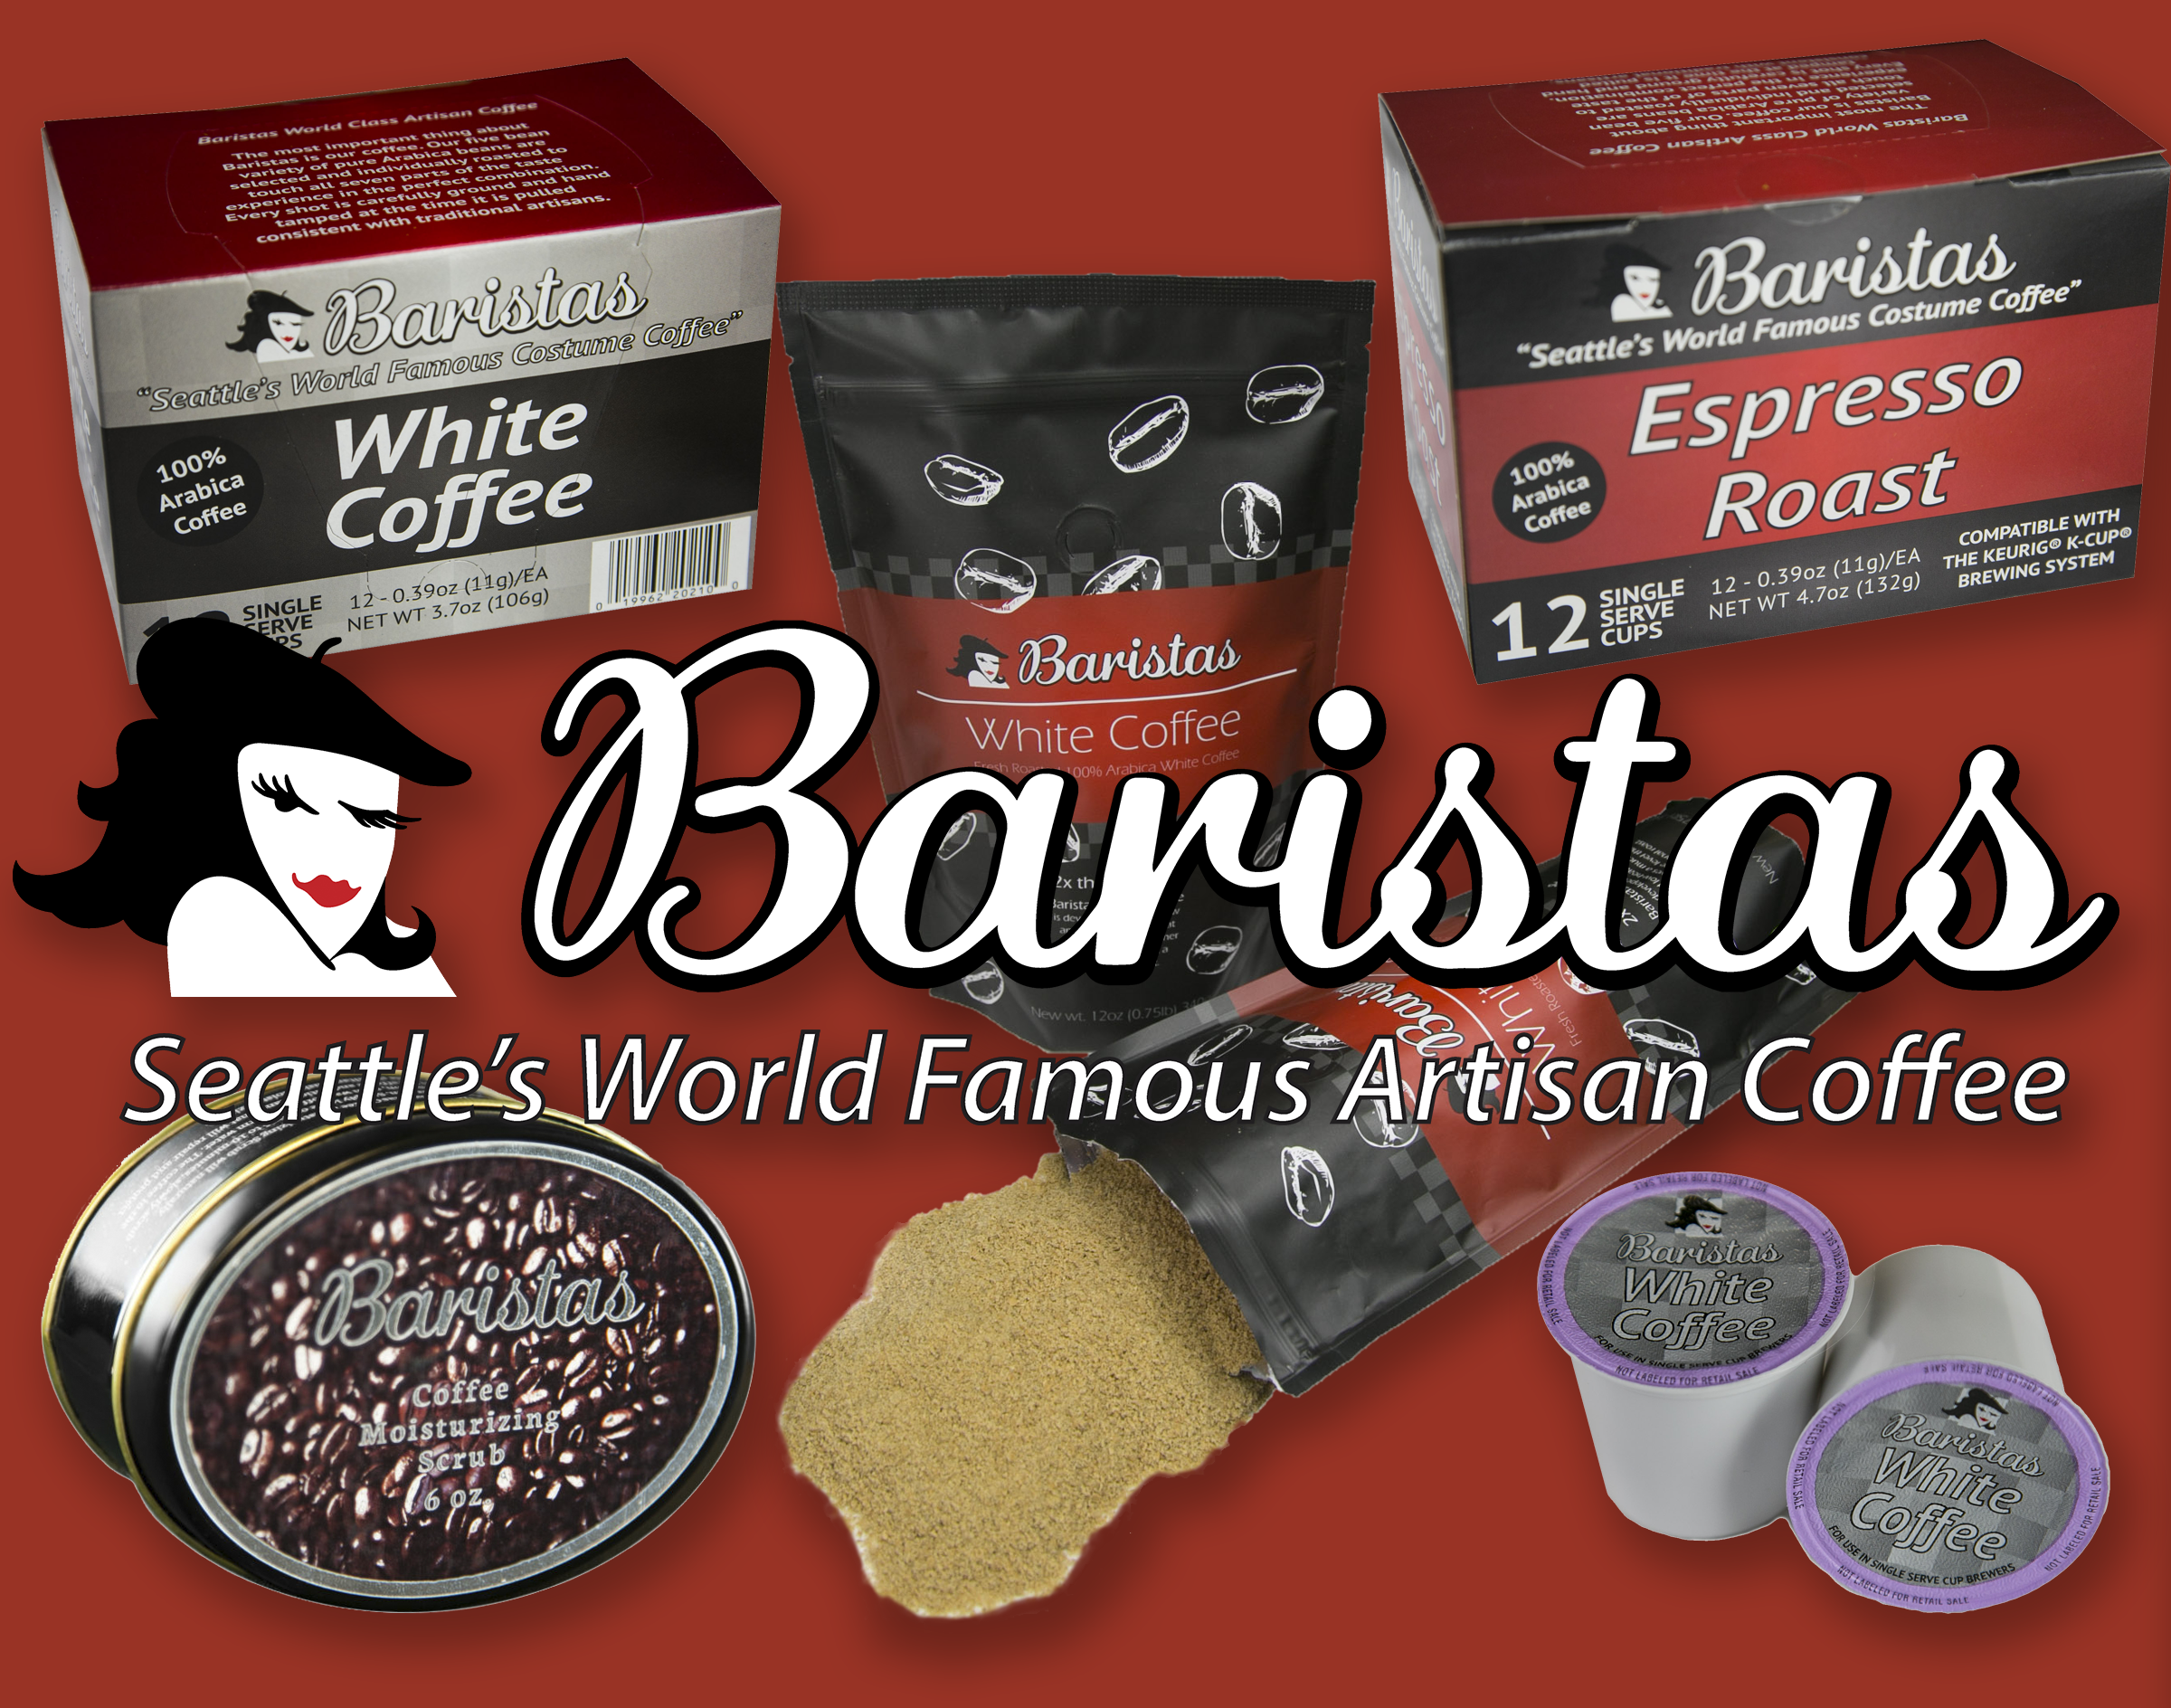 Baristas Coffee Company Inc., Monday, September 30, 2019, Press release picture